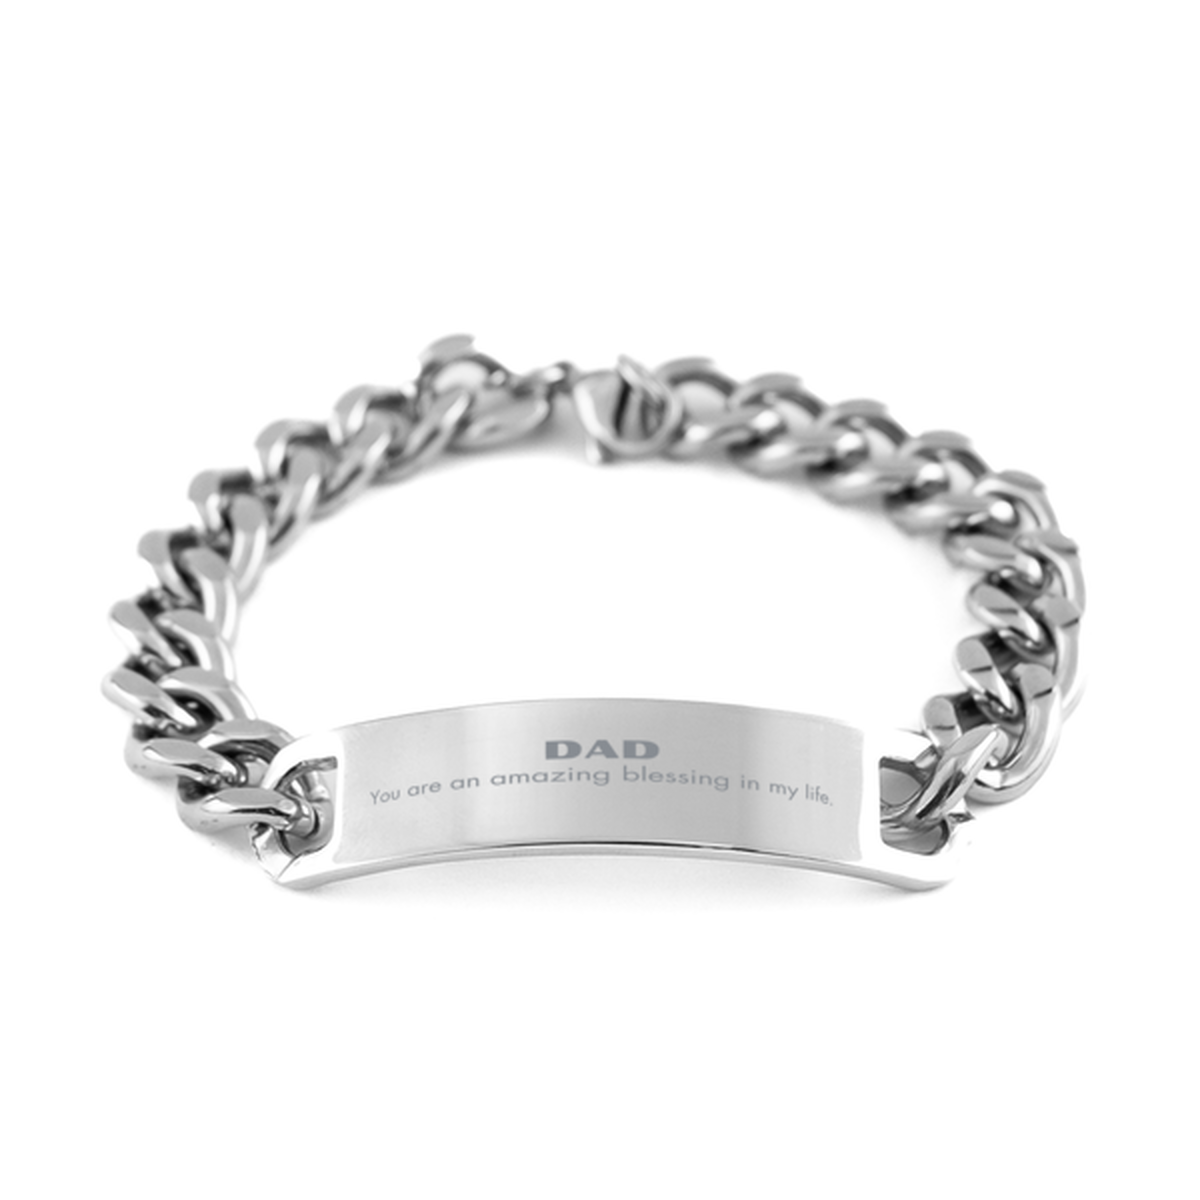 Dad Cuban Chain Stainless Steel Bracelet, You are an amazing blessing in my life, Thank You Gifts For Dad, Inspirational Birthday Christmas Unique Gifts For Dad